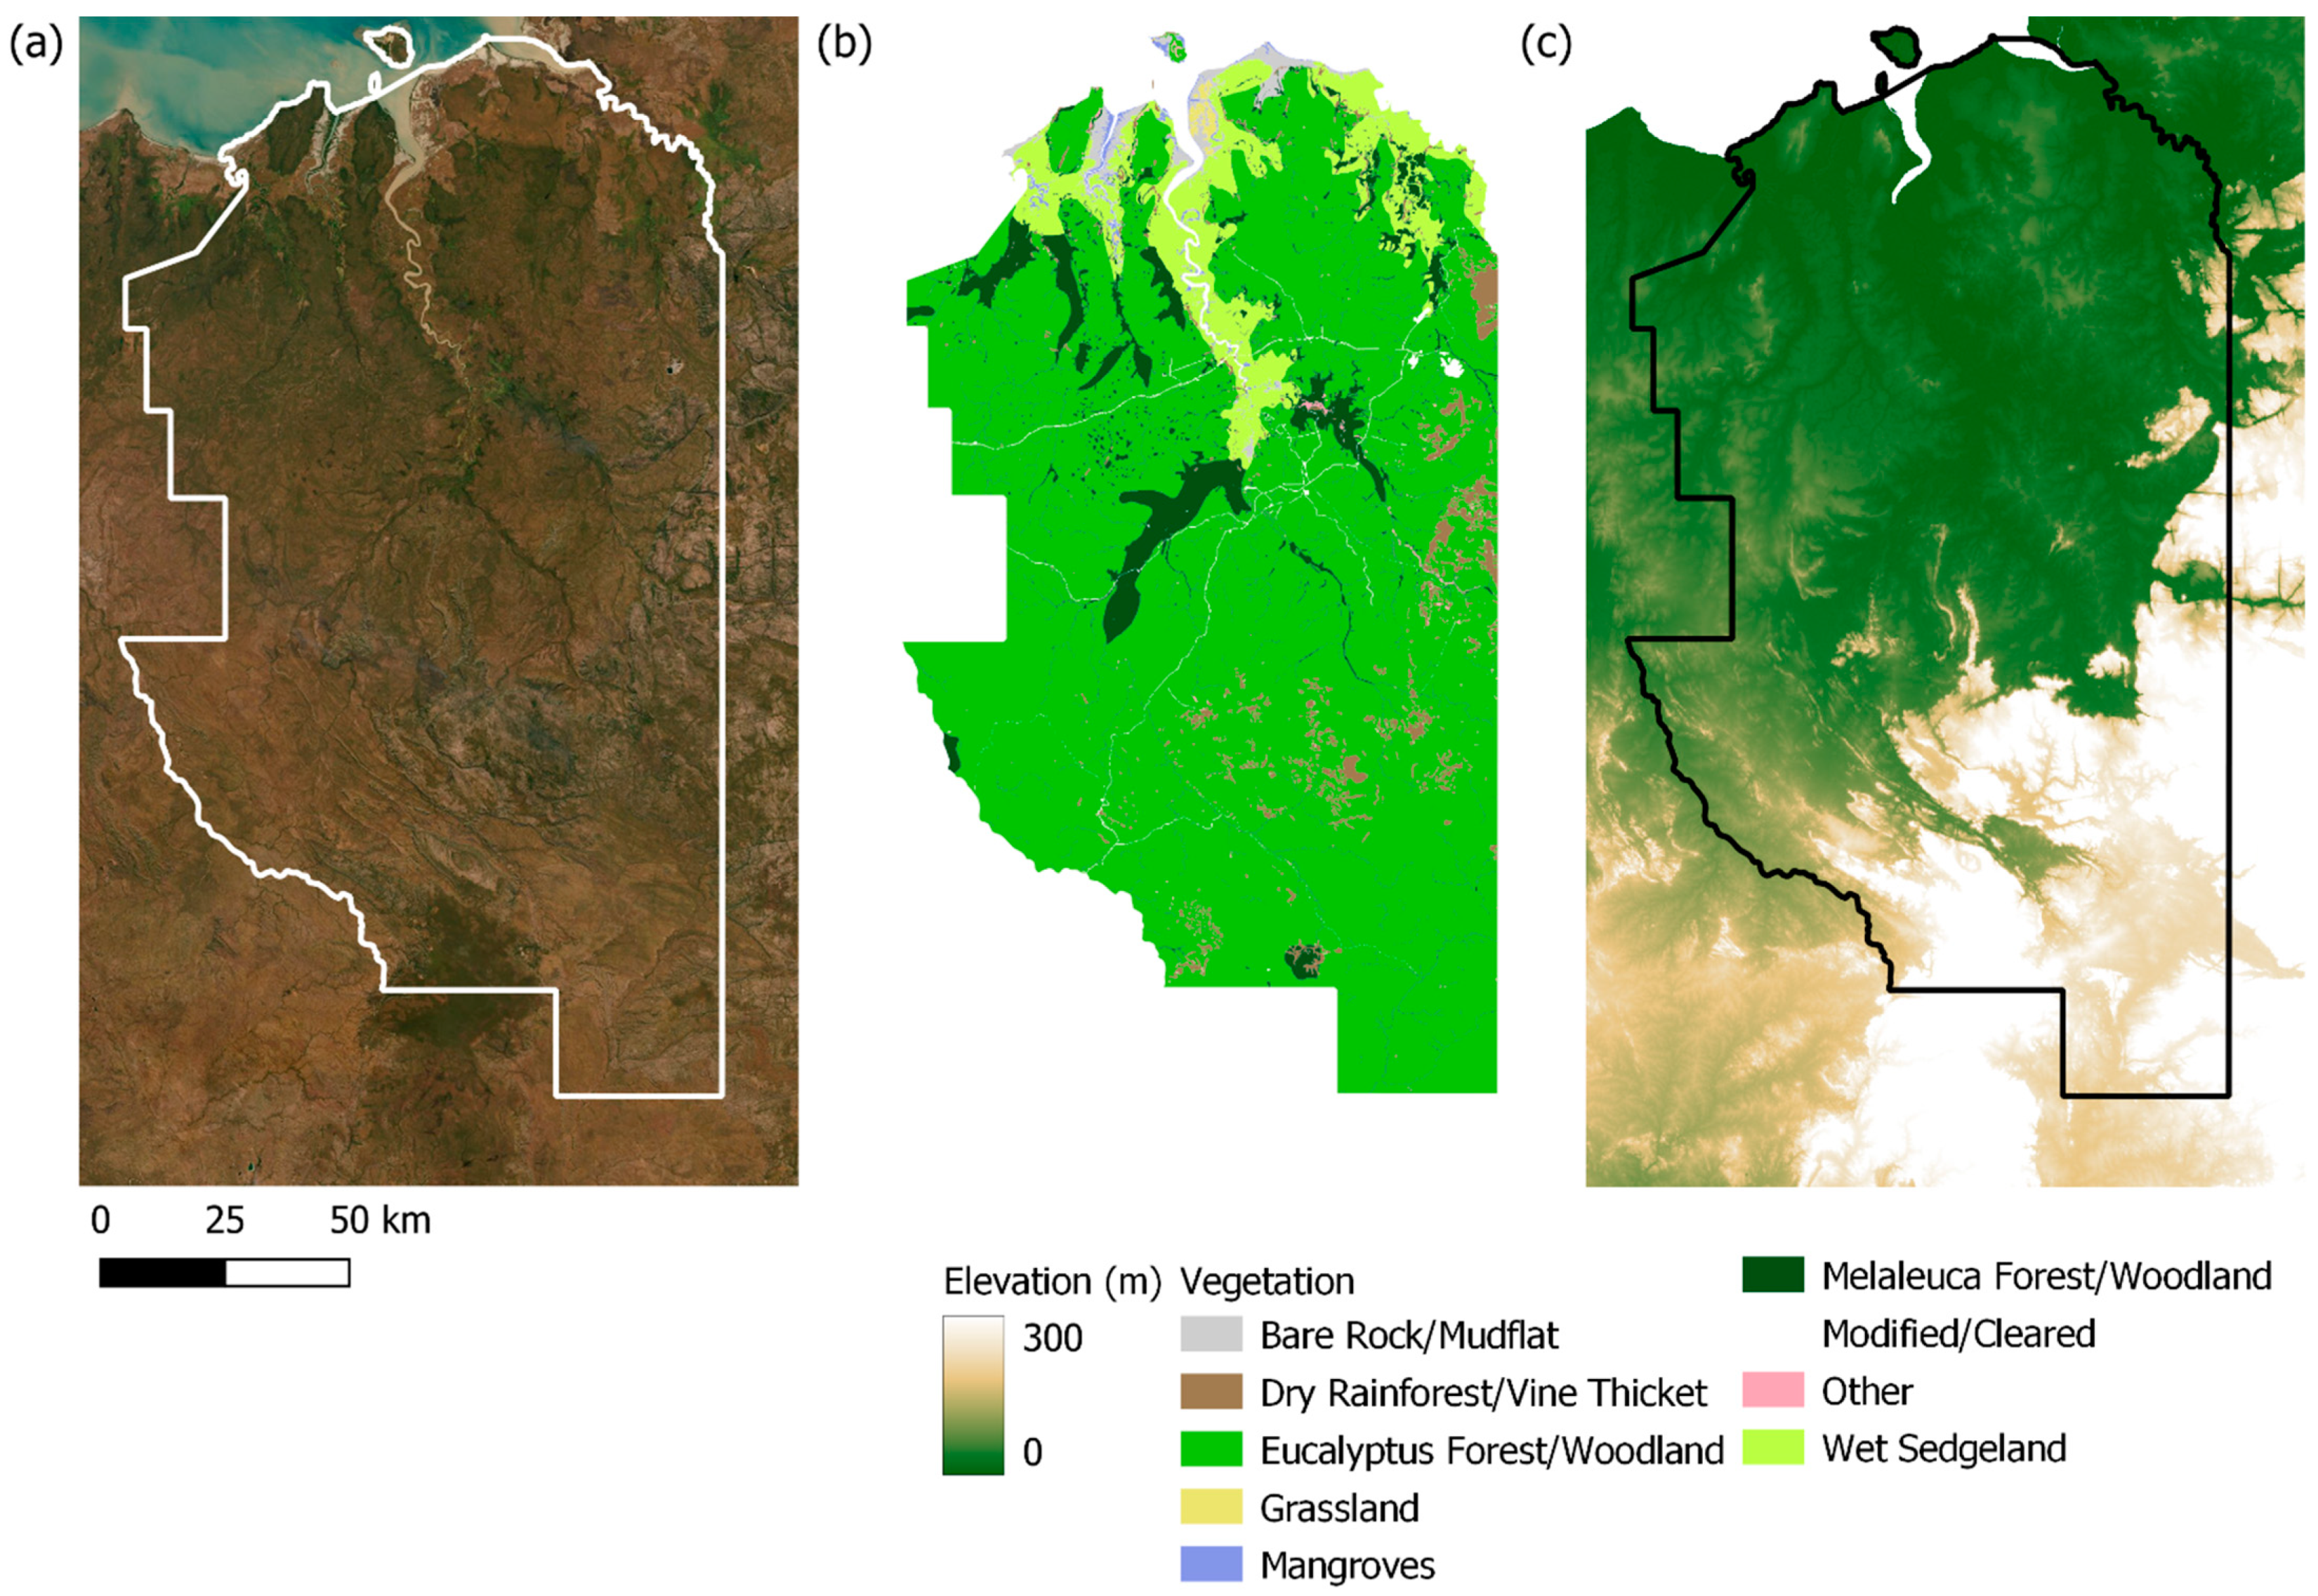 Fire | Free Full-Text | Double-Differenced dNBR: Combining MODIS and  Landsat Imagery to Map Fine-Grained Fire MOSAICS in Lowland Eucalyptus  Savanna in Kakadu National Park, Northern Australia